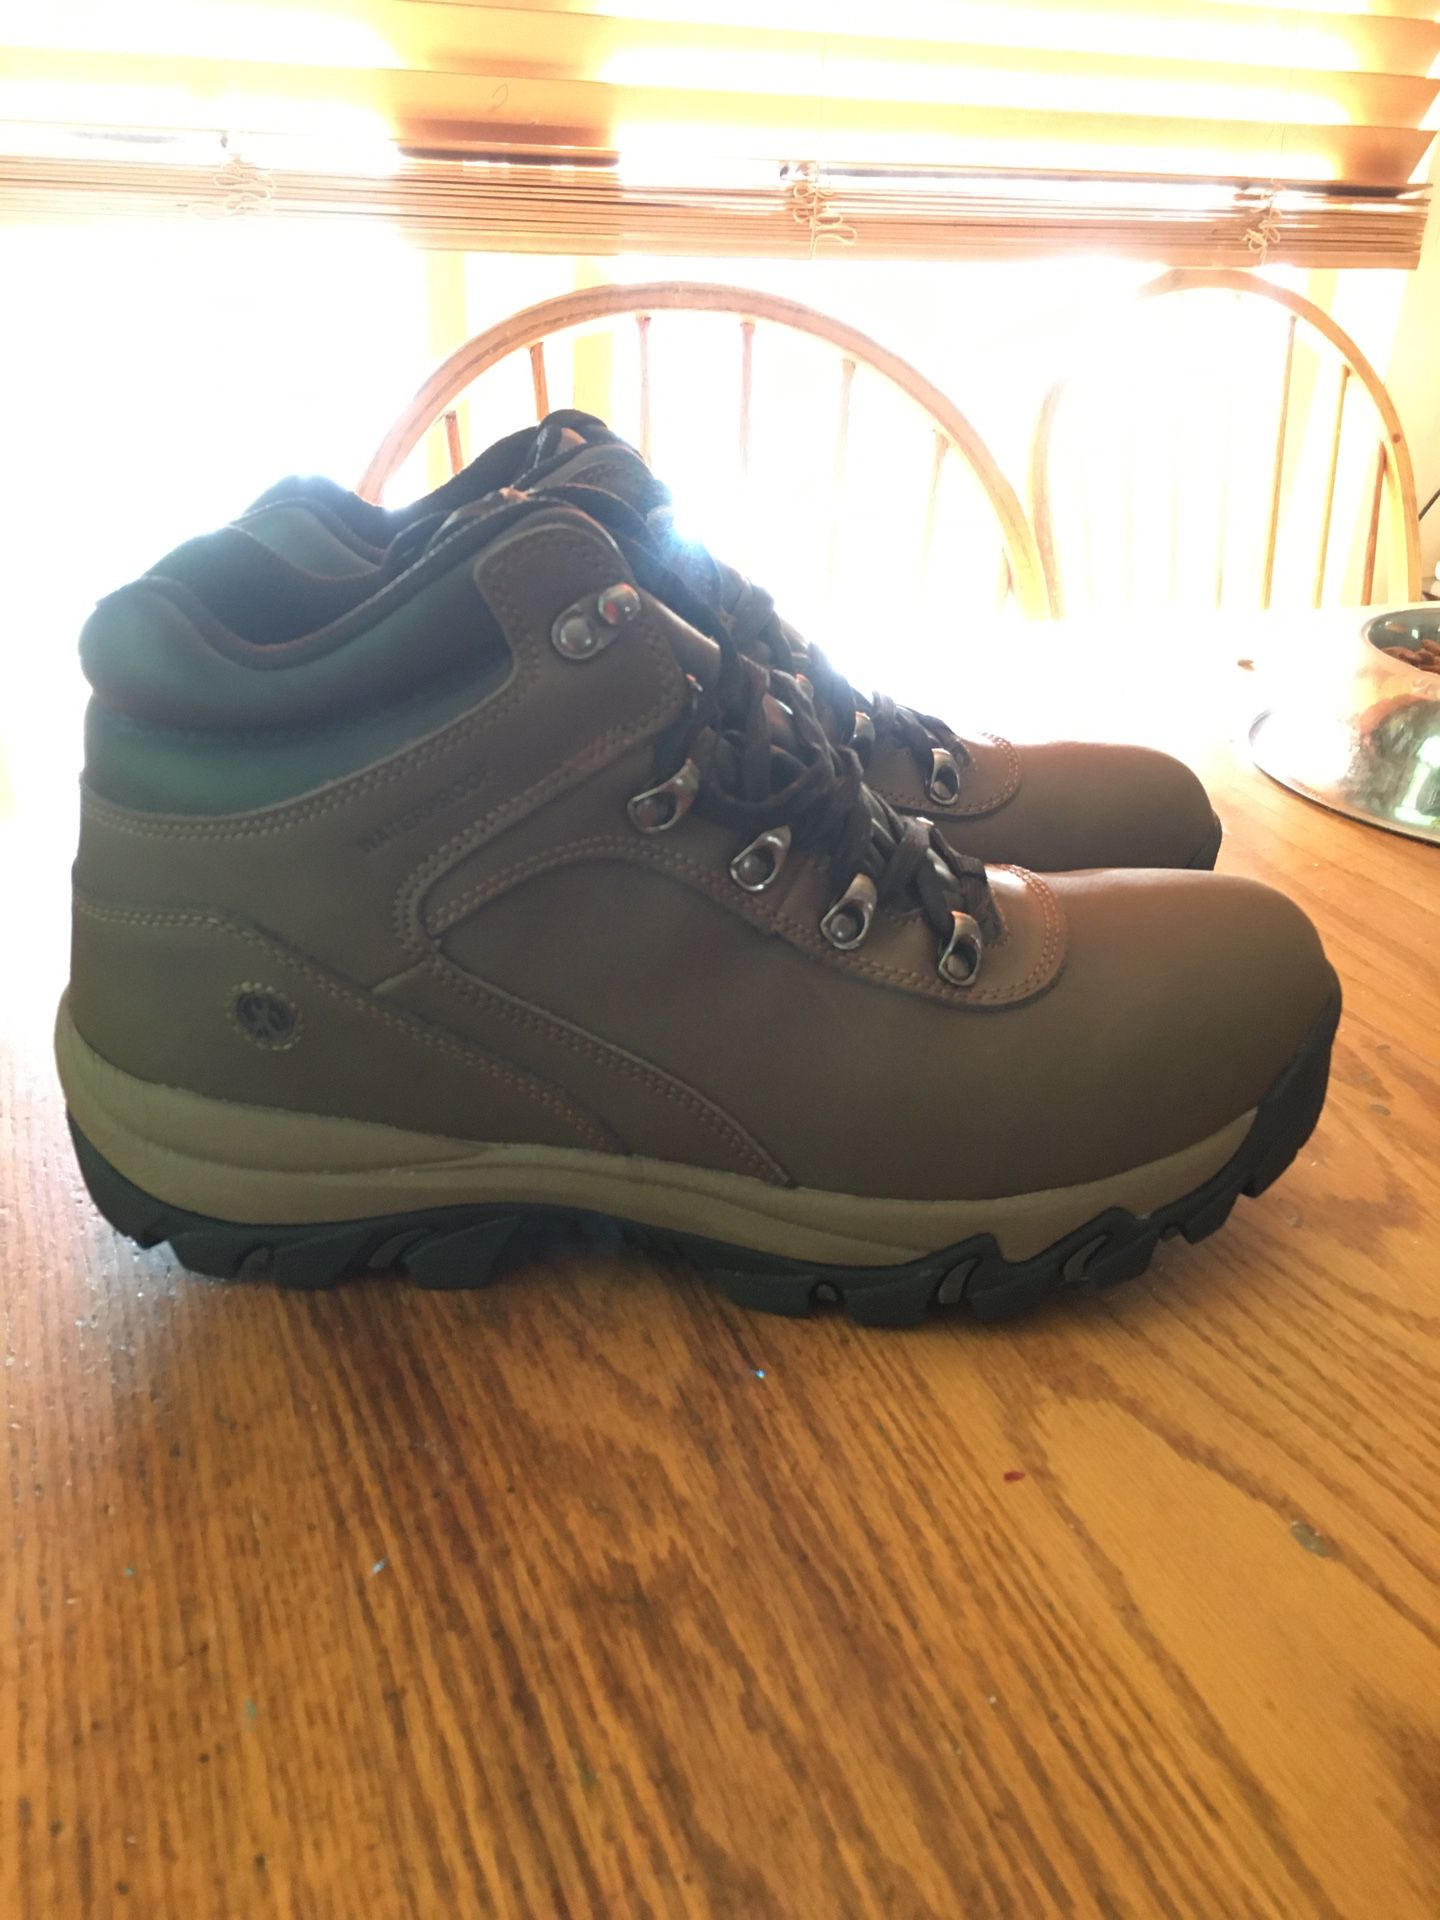 Hiking/Work Boots